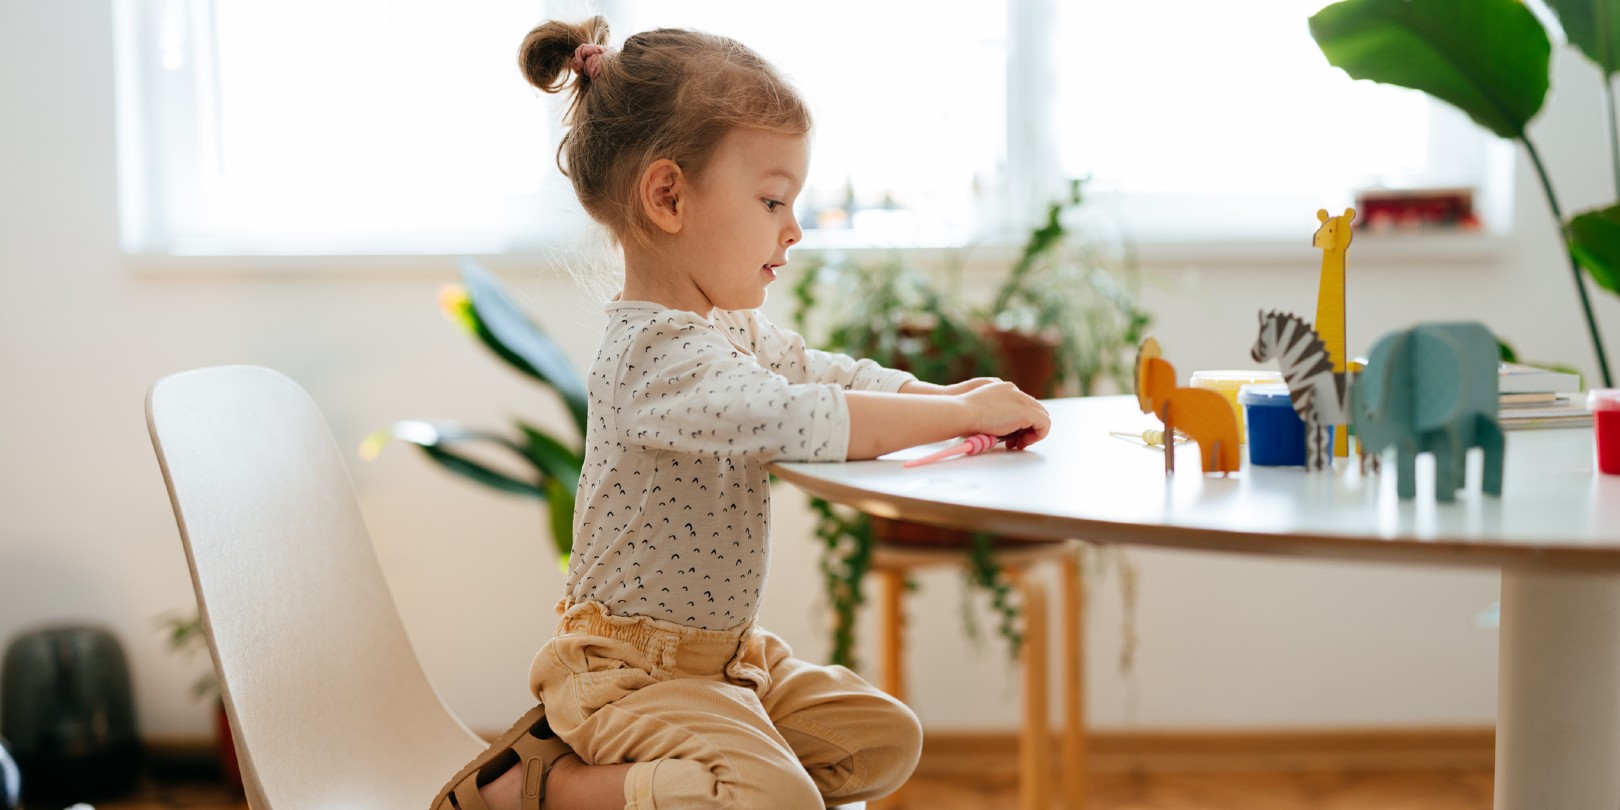 Cute little girl is crouching on the chair playing with paper animals that are on the table.